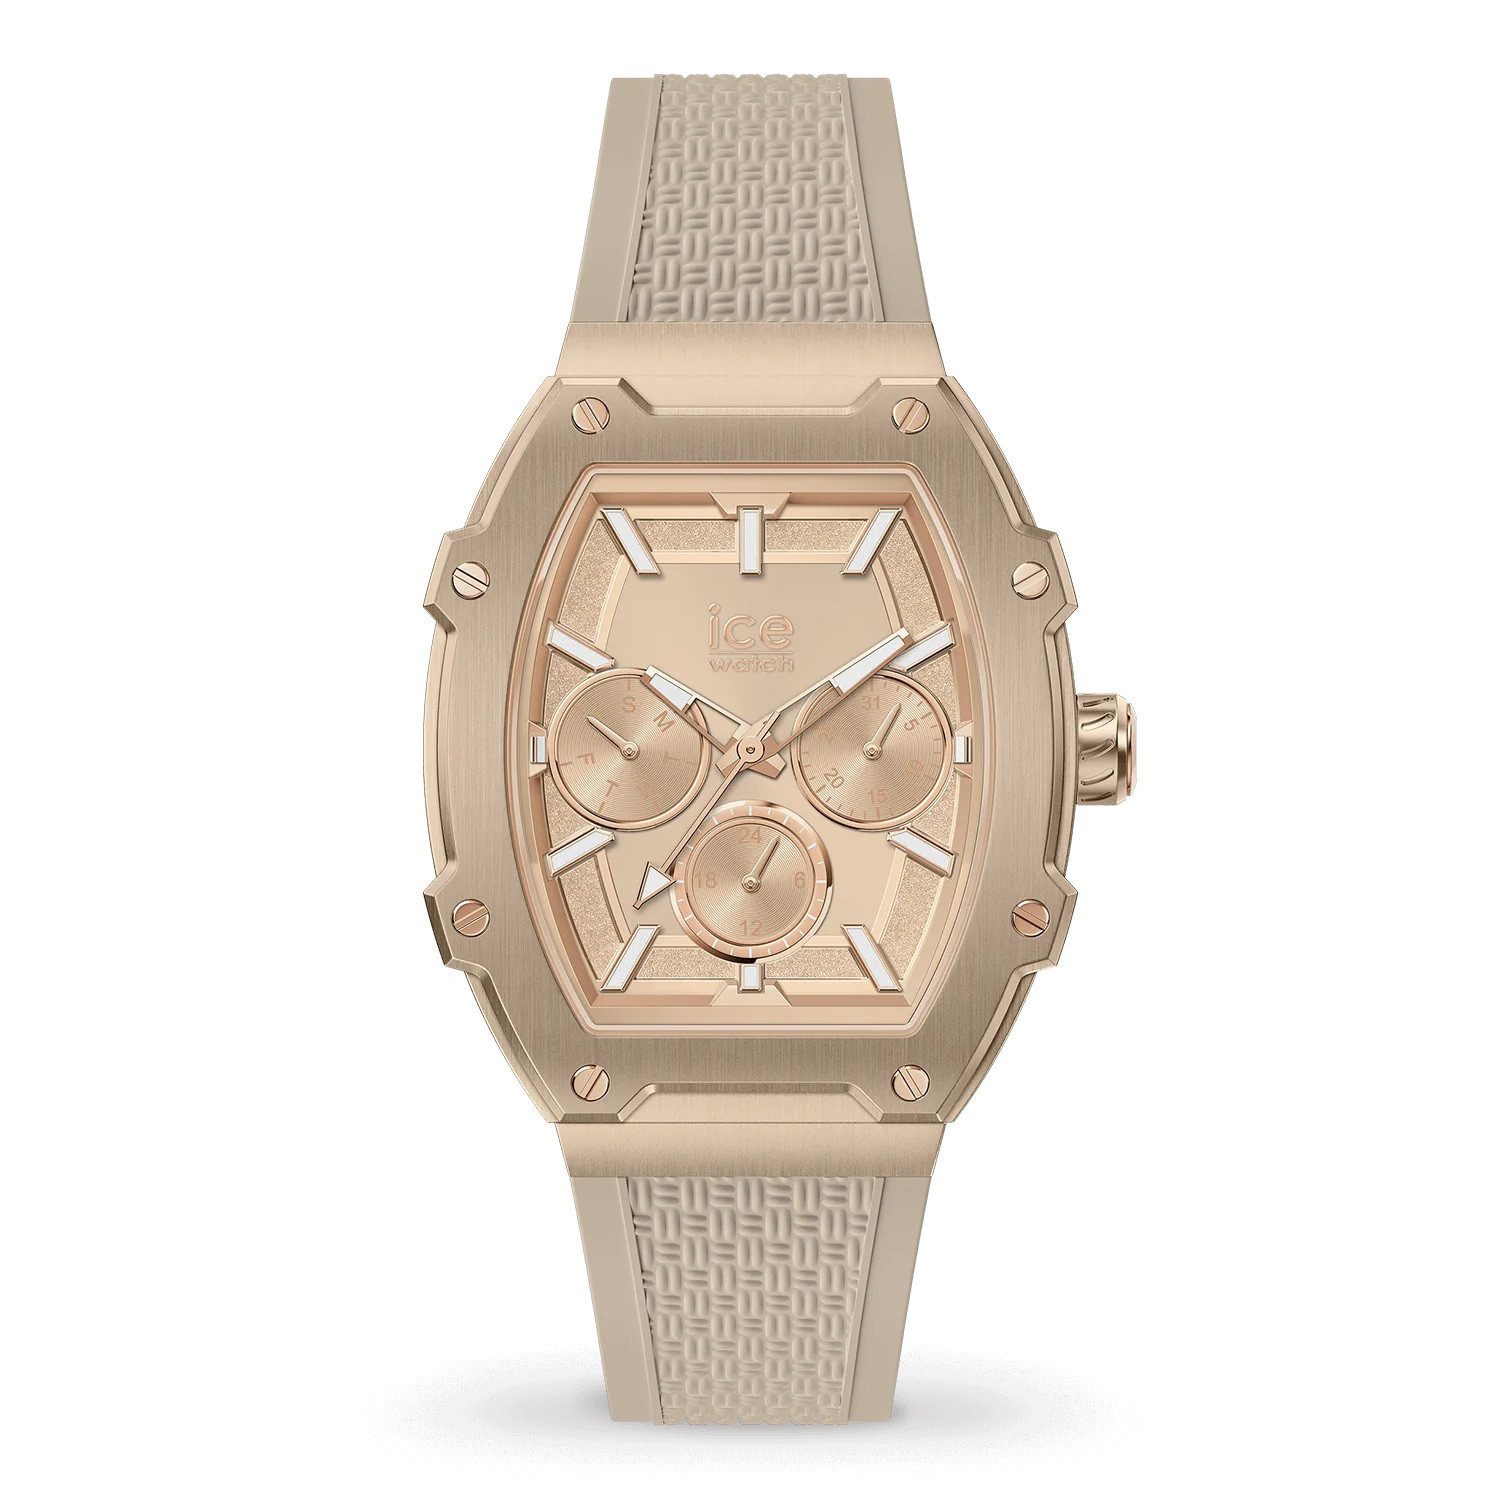 Montre femme Ice Watch Ice Boliday Timeless Taupe
alu